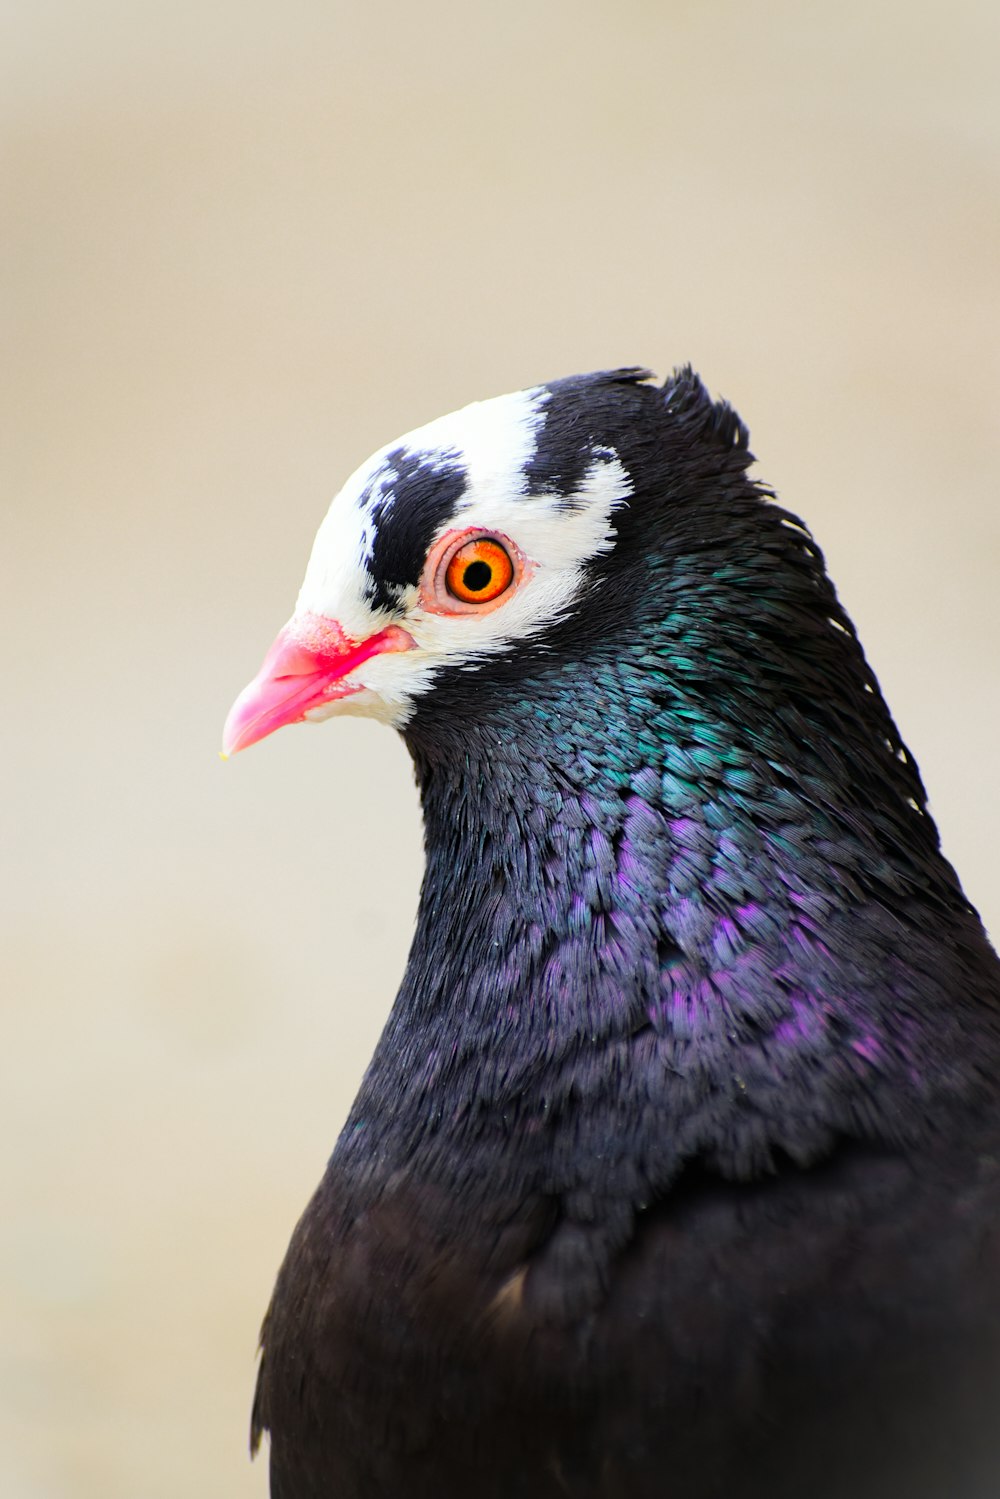 a close up of a black and white bird with orange eyes